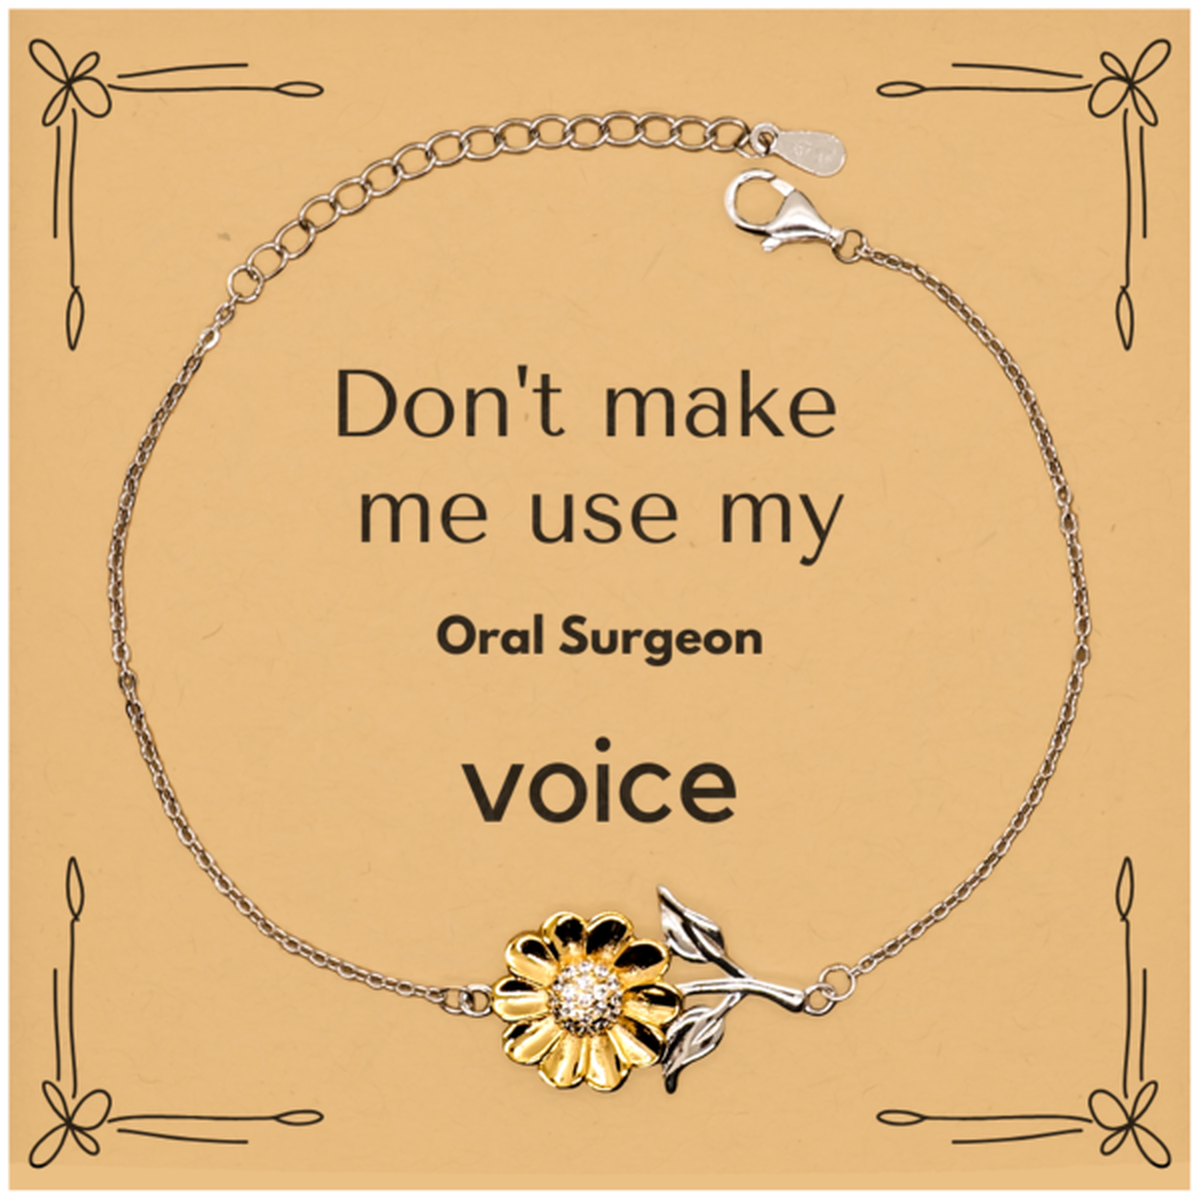 Don't make me use my Oral Surgeon voice, Sarcasm Oral Surgeon Card Gifts, Christmas Oral Surgeon Sunflower Bracelet Birthday Unique Gifts For Oral Surgeon Coworkers, Men, Women, Colleague, Friends